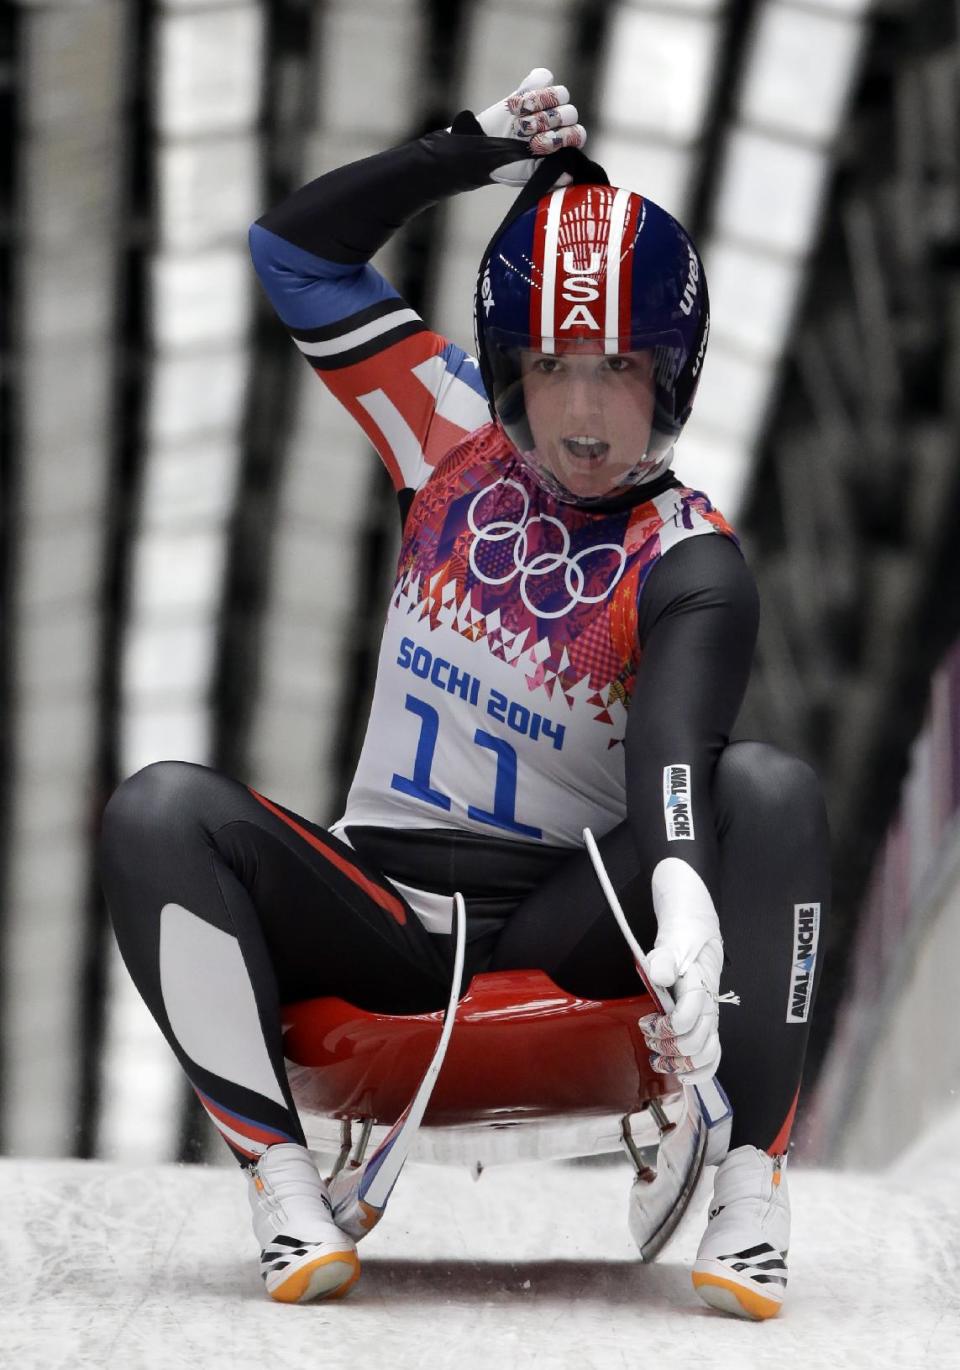 Erin Hamlin of the United States brakes in the finish area after finishing her first run during the women's singles luge competition at the 2014 Winter Olympics, Monday, Feb. 10, 2014, in Krasnaya Polyana, Russia. (AP Photo/Dita Alangkara)